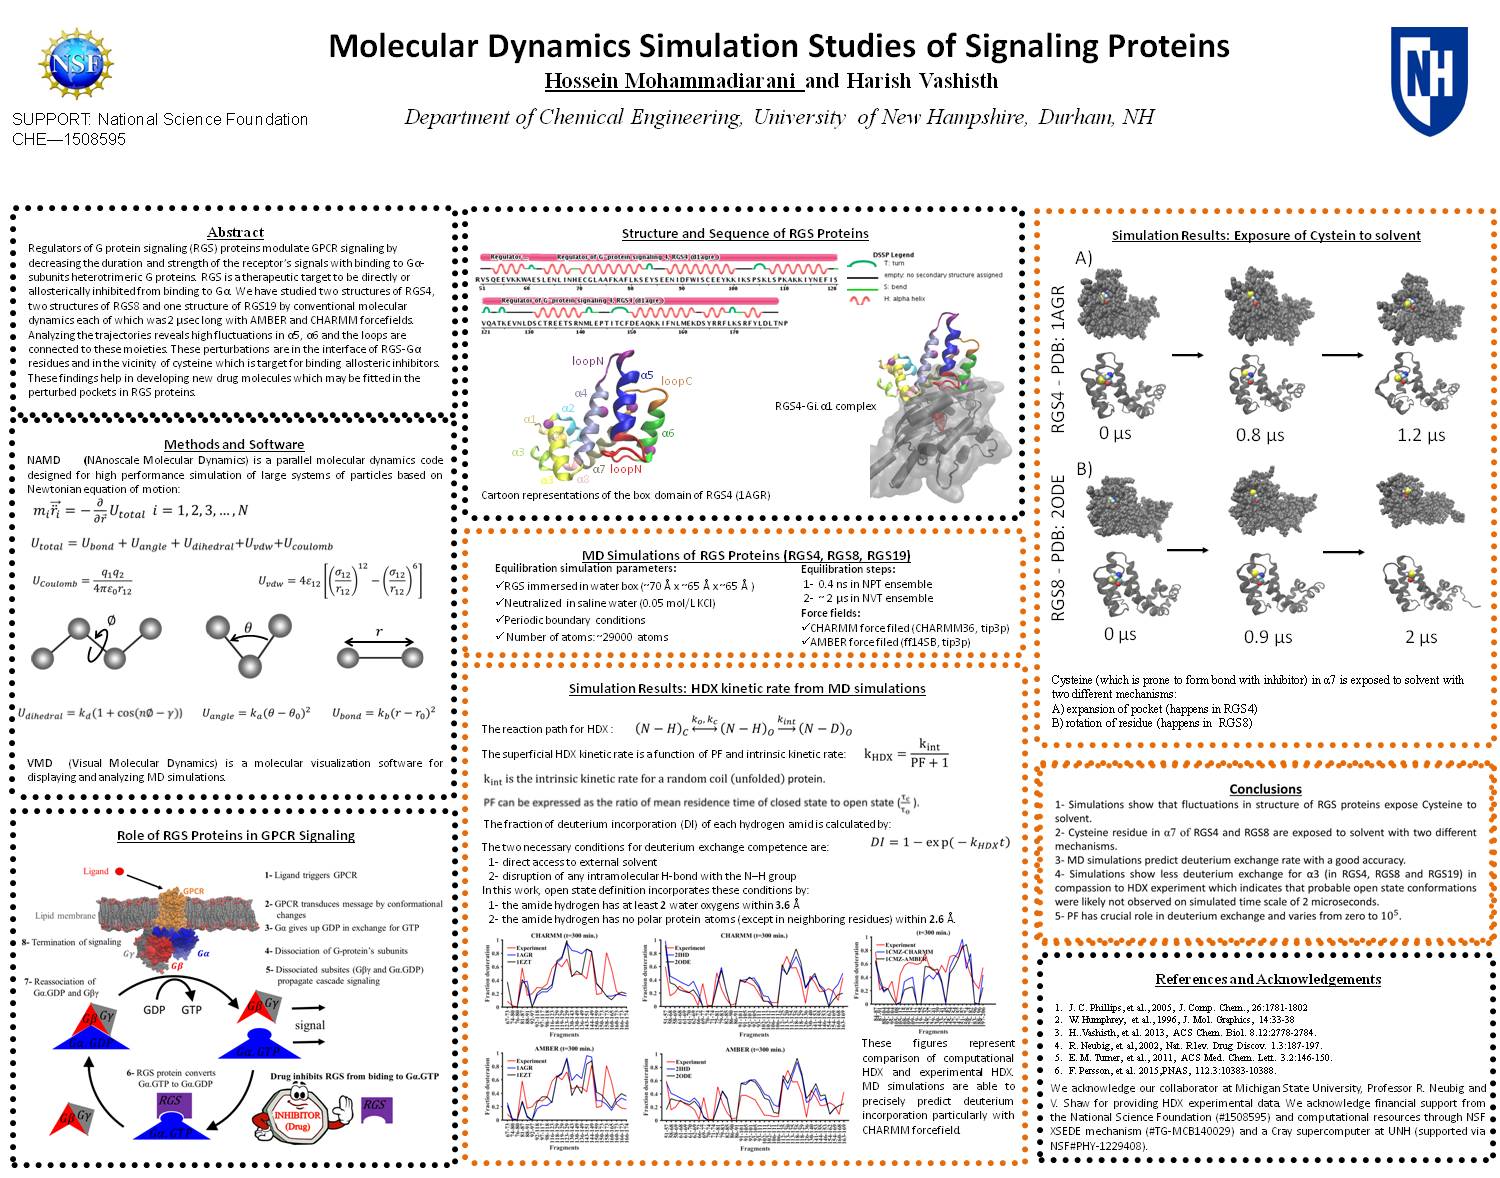 Molecular Dynamics Simulation Studies Of Signaling Proteins by hm2006